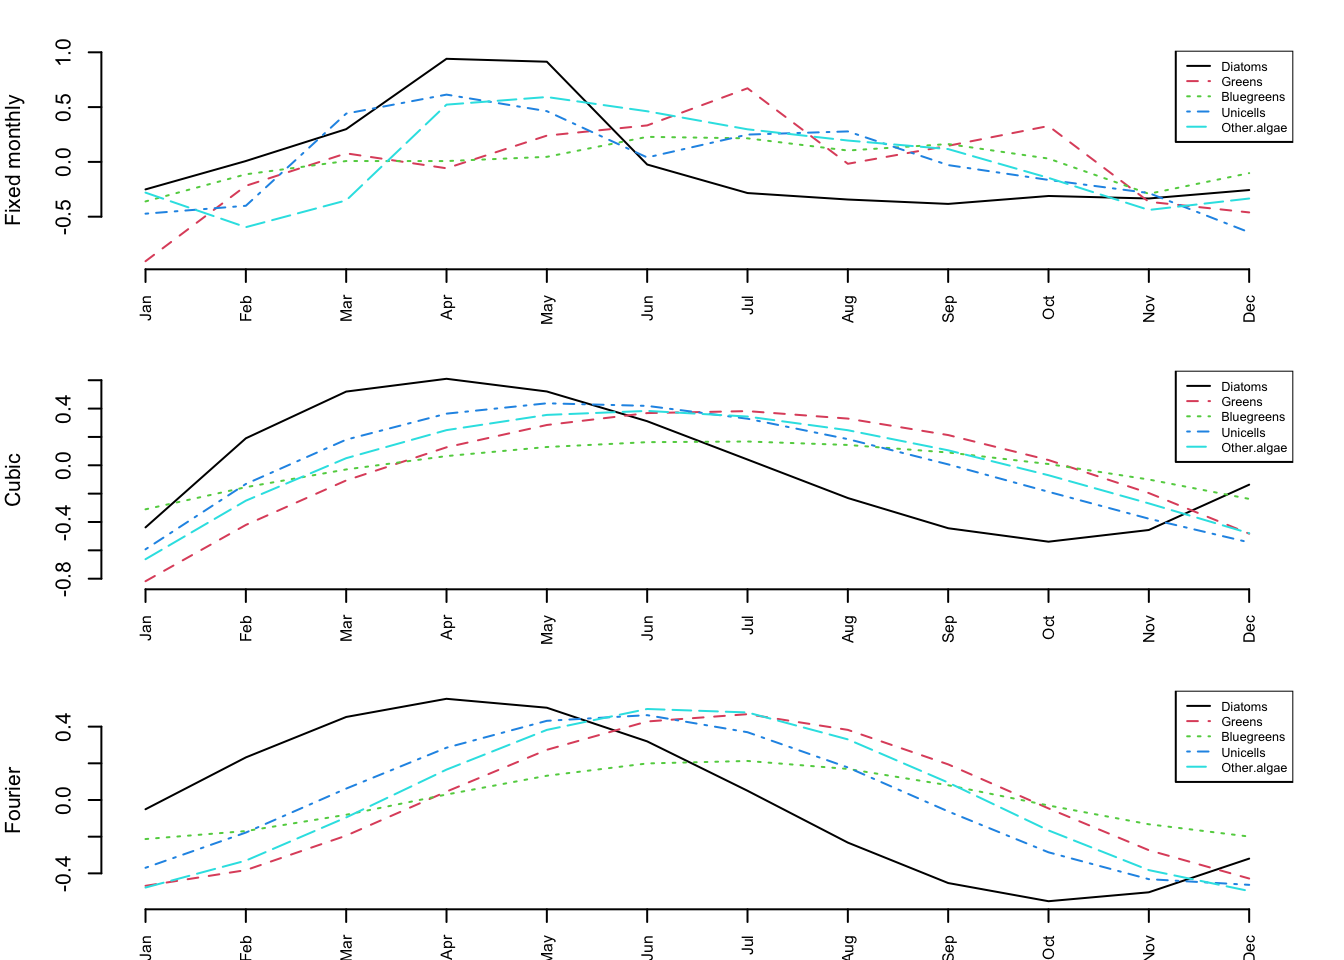 Estimated monthly effects for the three approaches to estimating seasonal effects. Top panel: each month modelled as a separate fixed effect for each taxon (60 parameters); Middle panel: monthly effects modelled as a 3rd order polynomial (20 parameters); Bottom panel: monthly effects modelled as a discrete Fourier series (10 parameters).